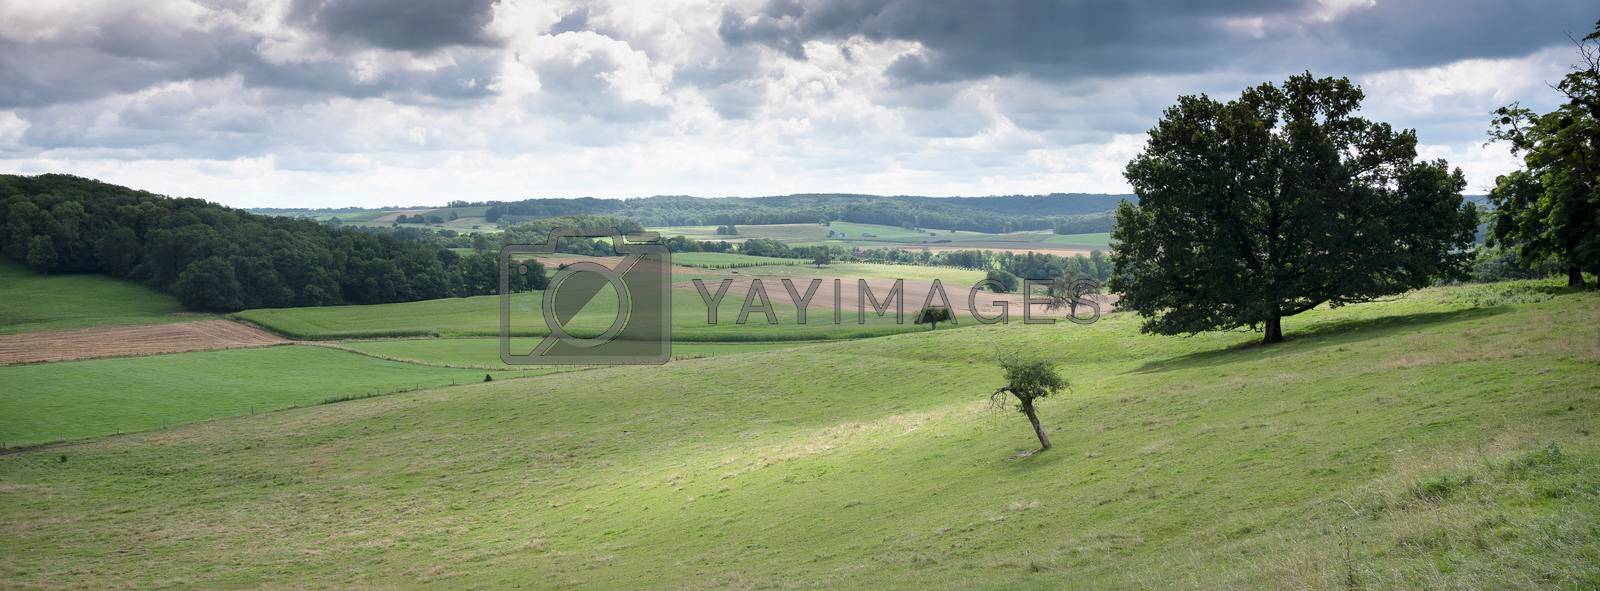 rural countryside summer landscape with green meadows and trees in french ardennes near charleville under cloudy sky in france